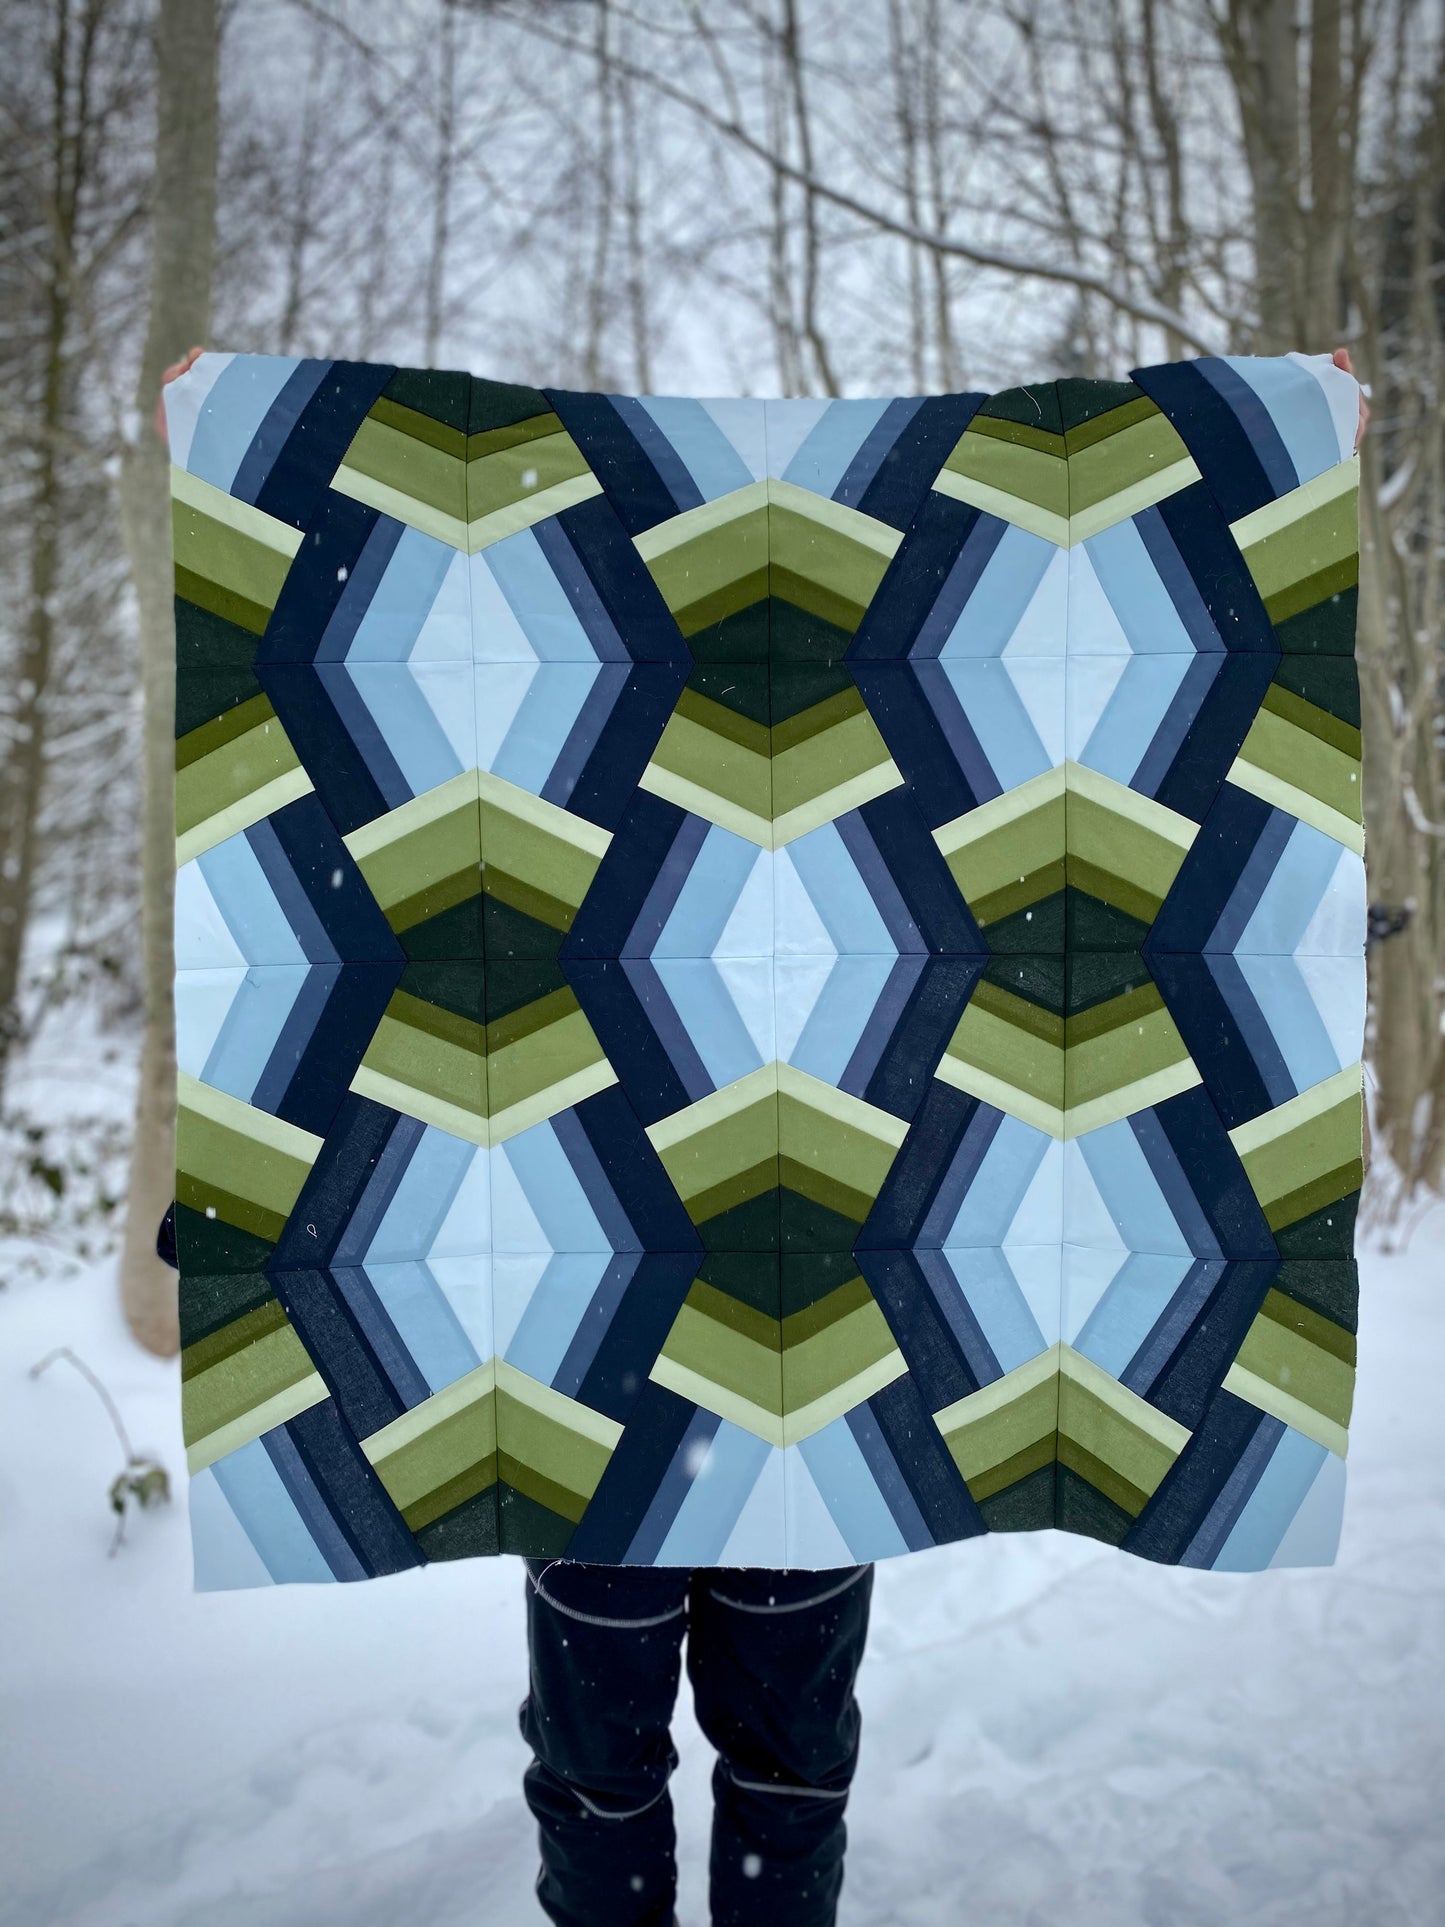 Bracken Quilt - Julia Wachs Designs - A blue and green Bracken quilt is held by its maker outside in the snow.